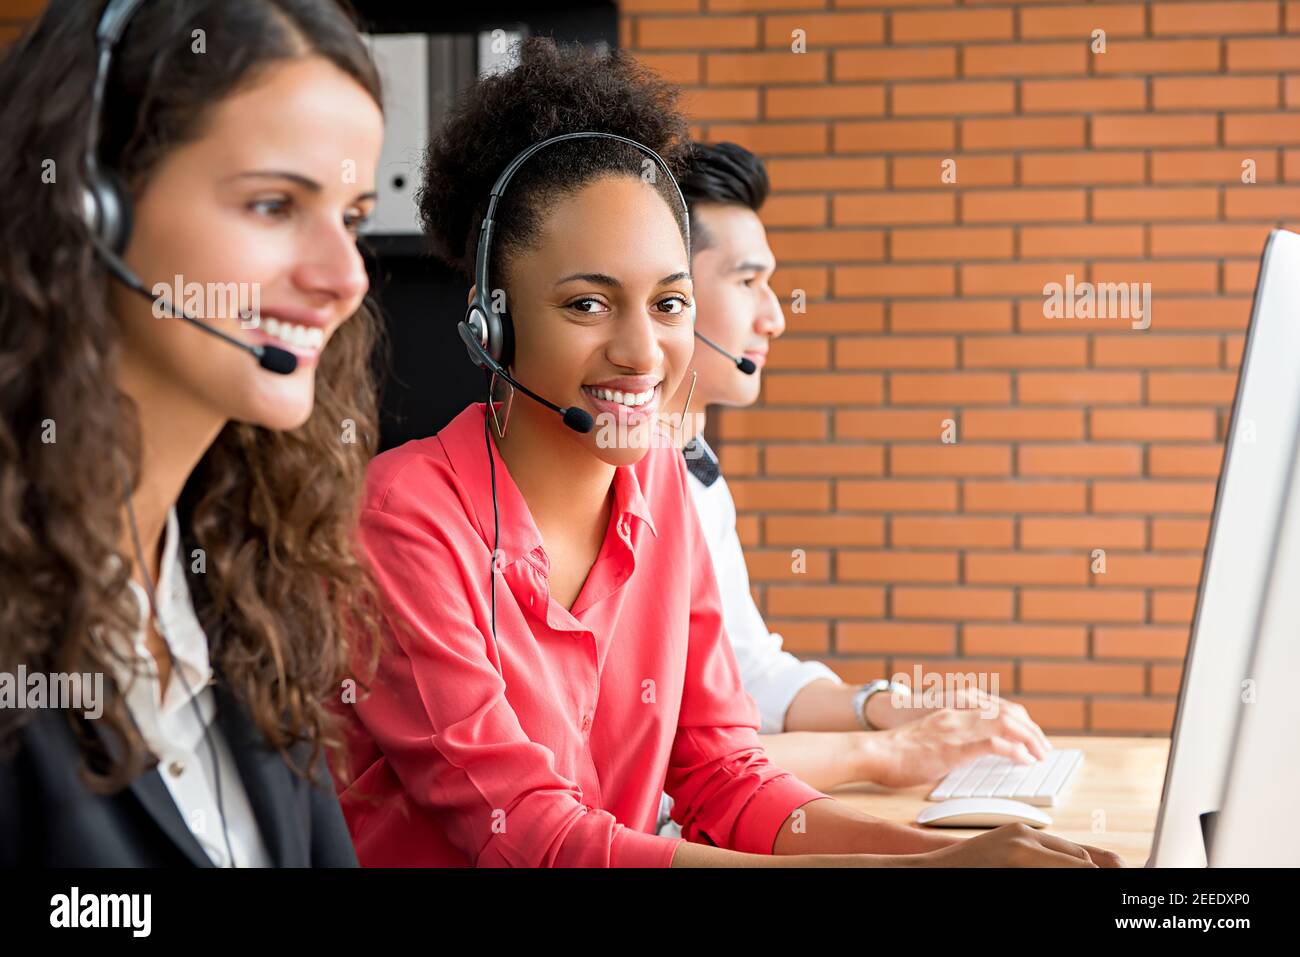 Smiling black female telemarketing customer service agent working in call center with multi-ethnic team Stock Photo